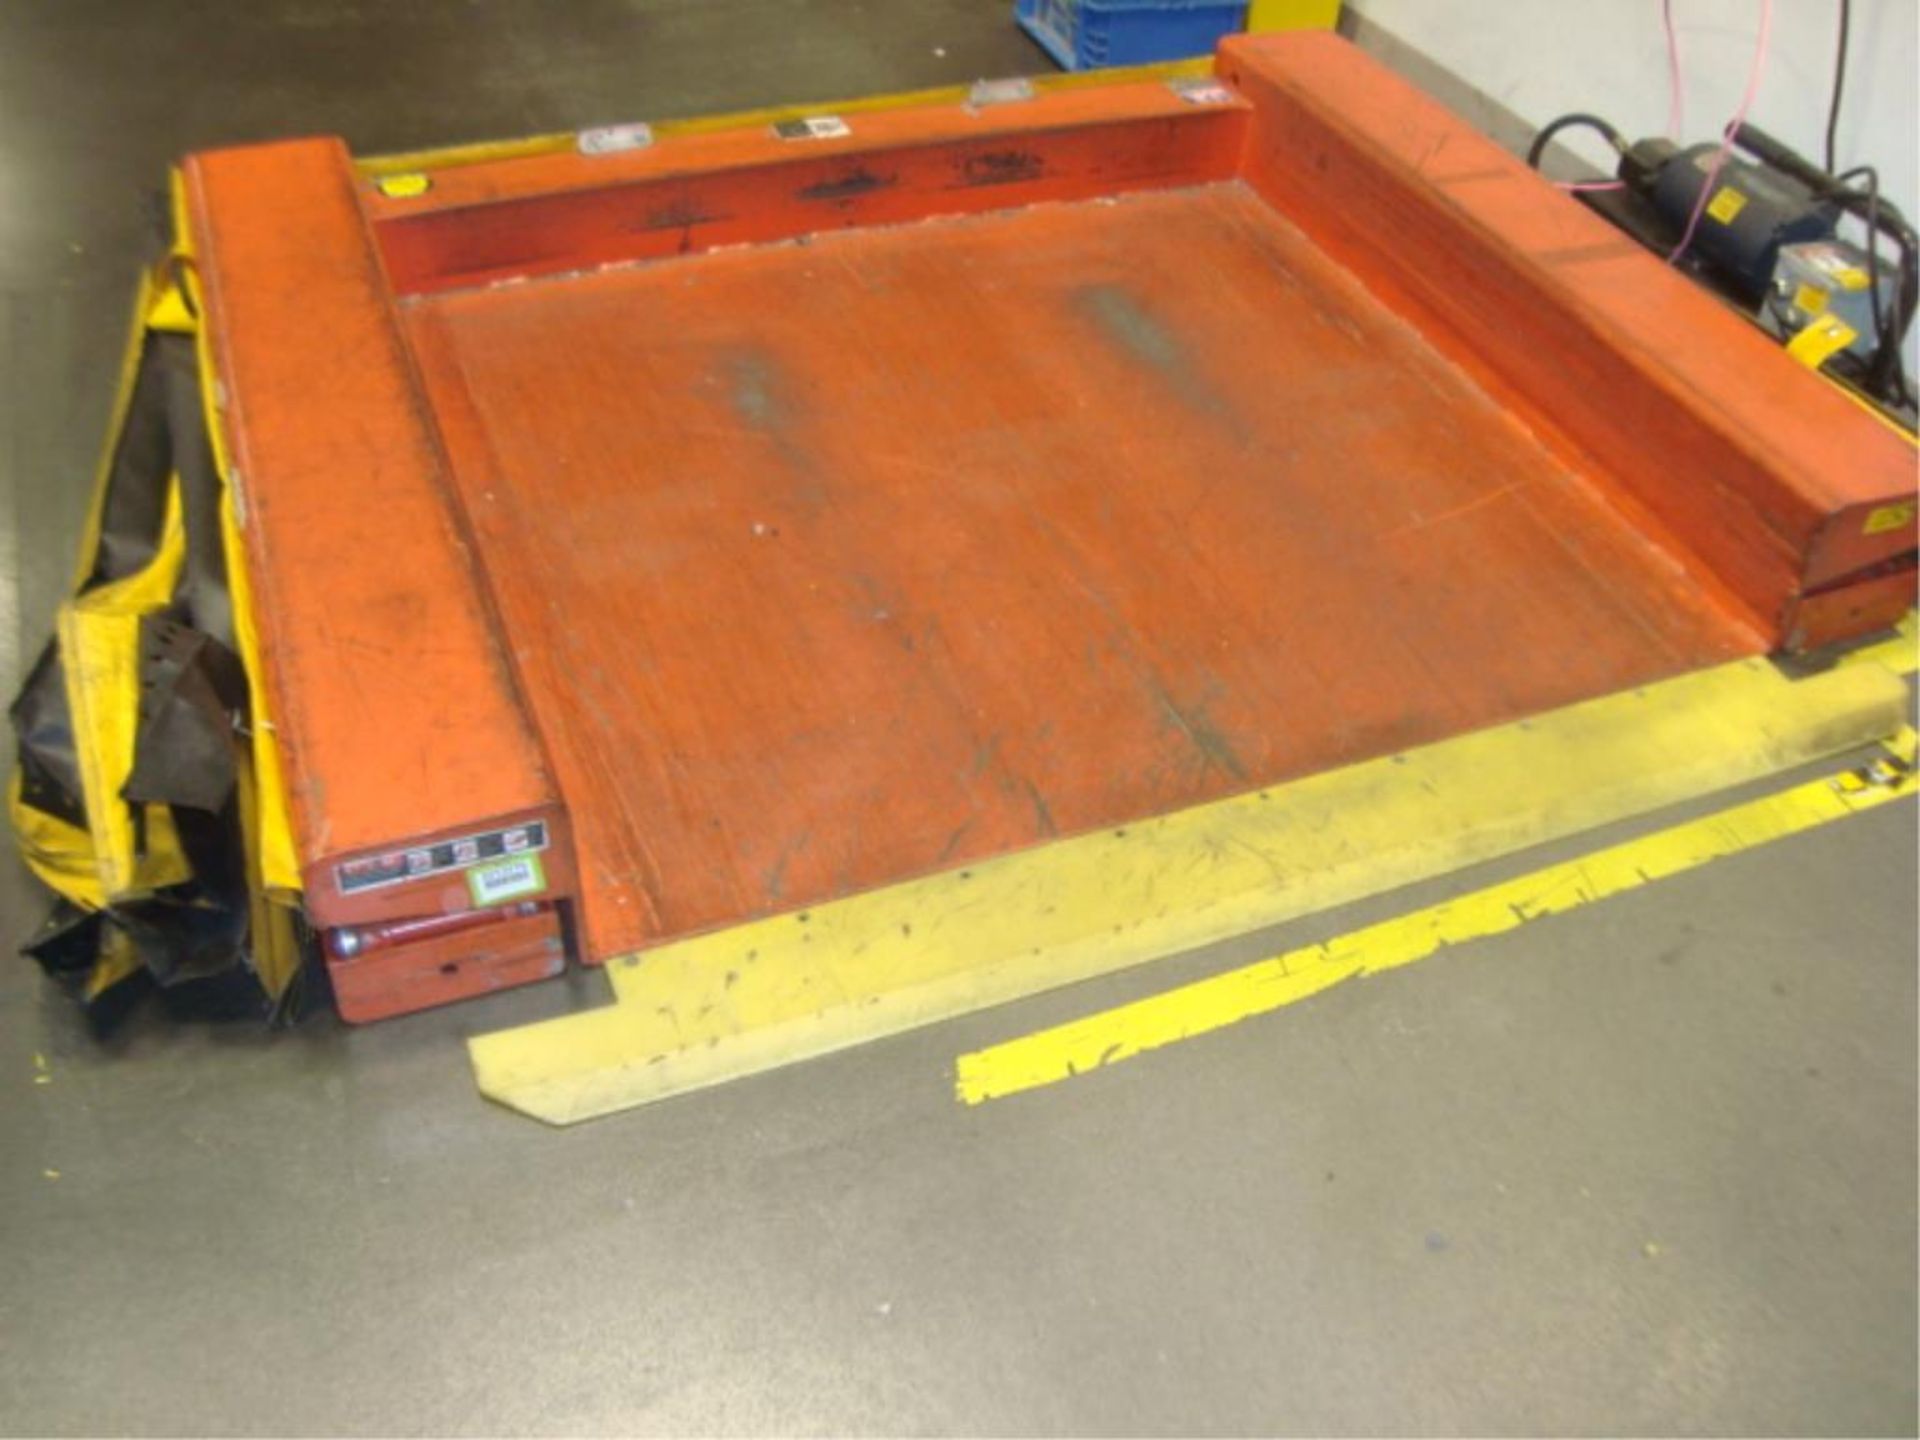 Floor Level Pan Lift Table - Image 5 of 5